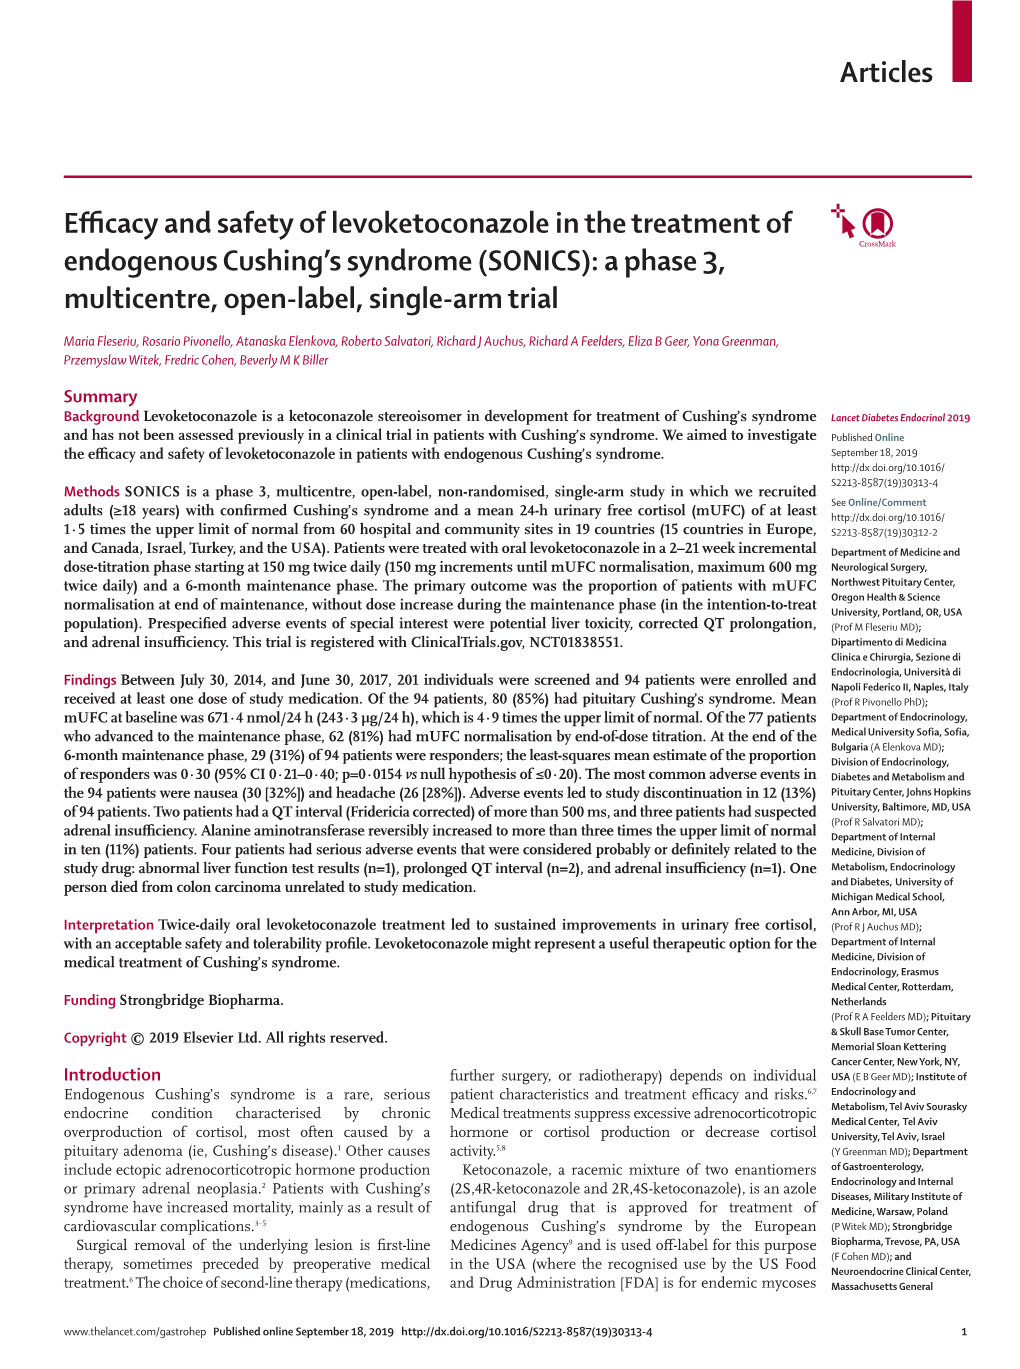 Efficacy and Safety of Levoketoconazole in the Treatment of Endogenous Cushing's Syndrome (SONICS): a Phase 3, Multicentre